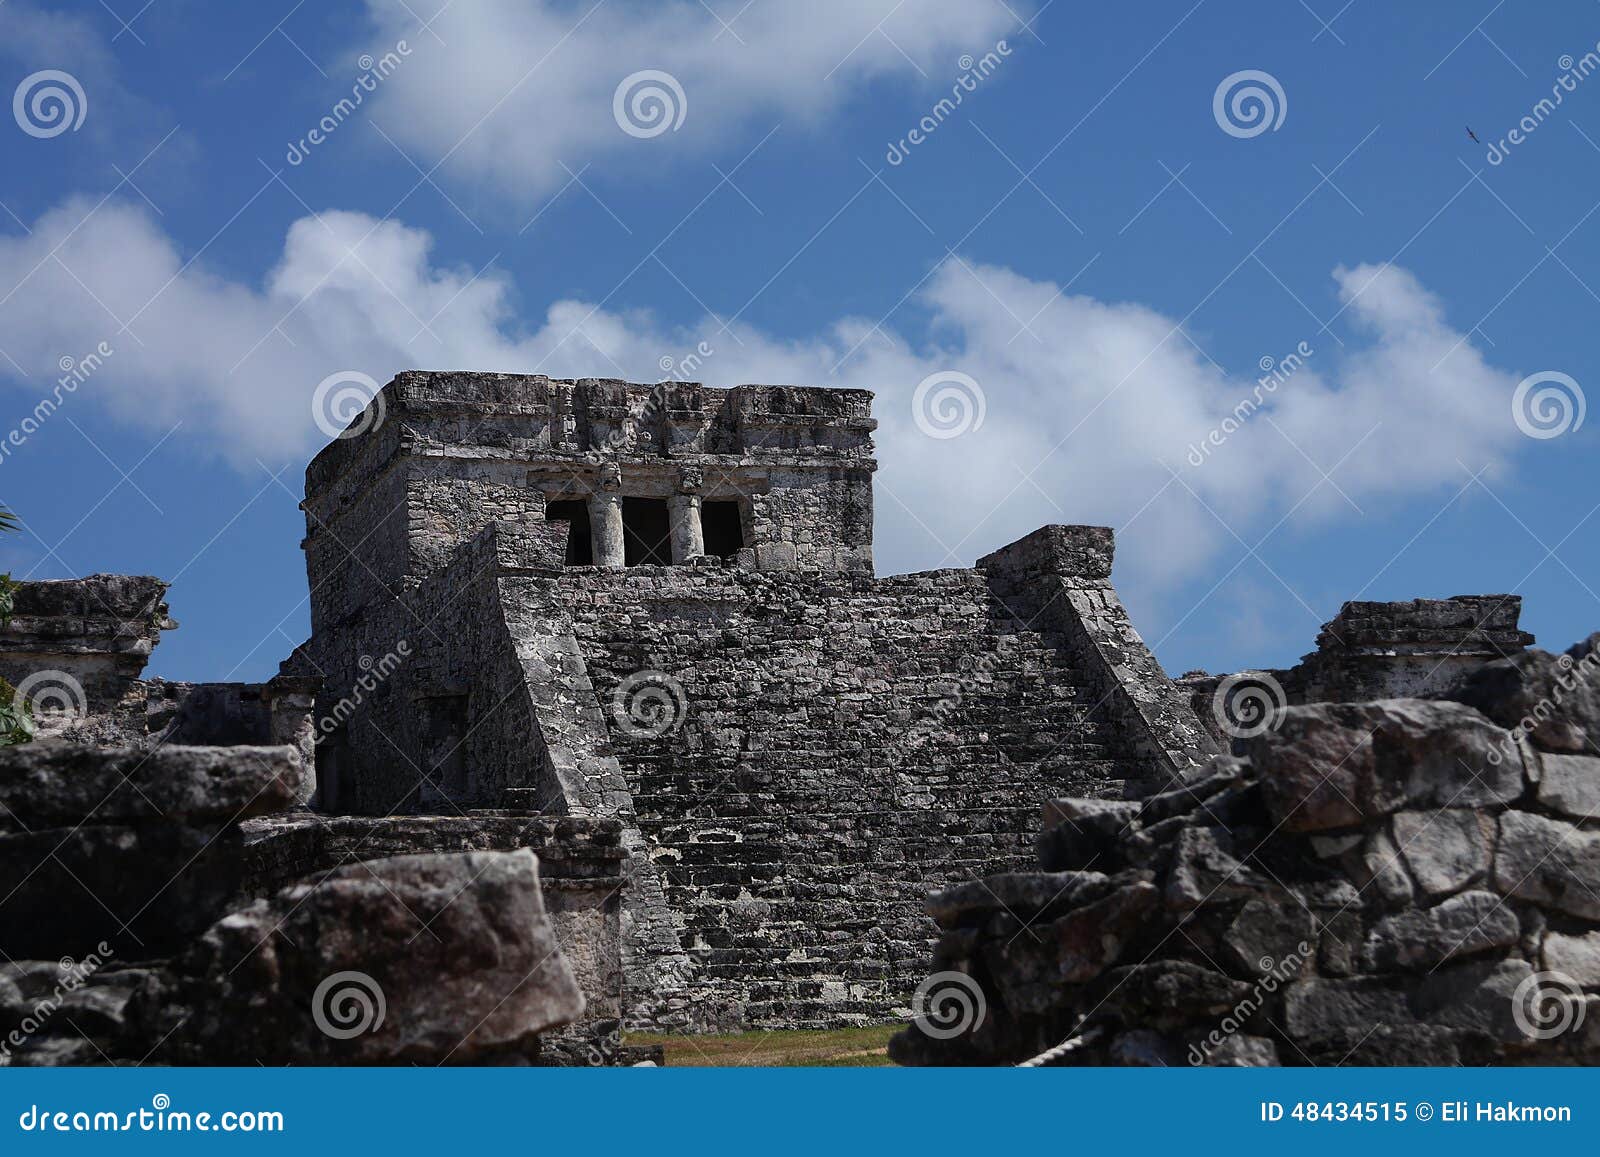 temple of the mayans in mexico